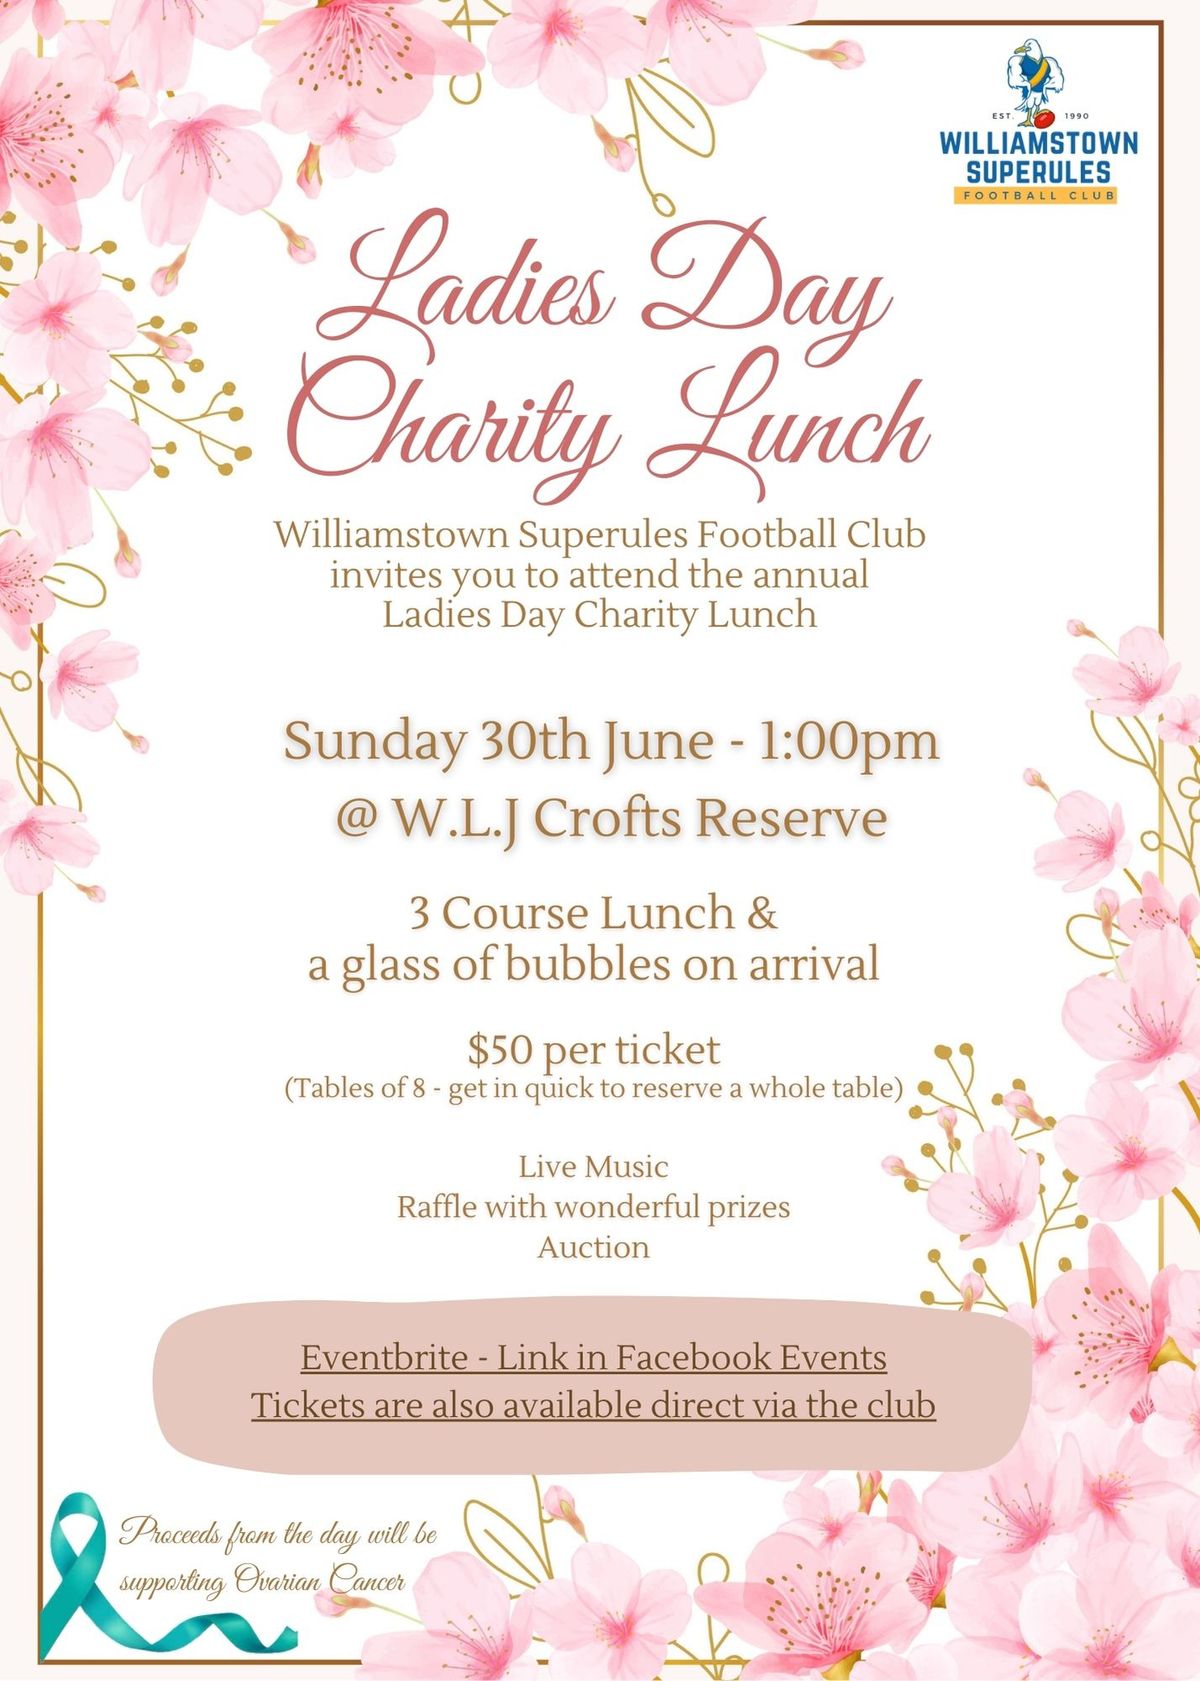 Ladies Day Charity Lunch